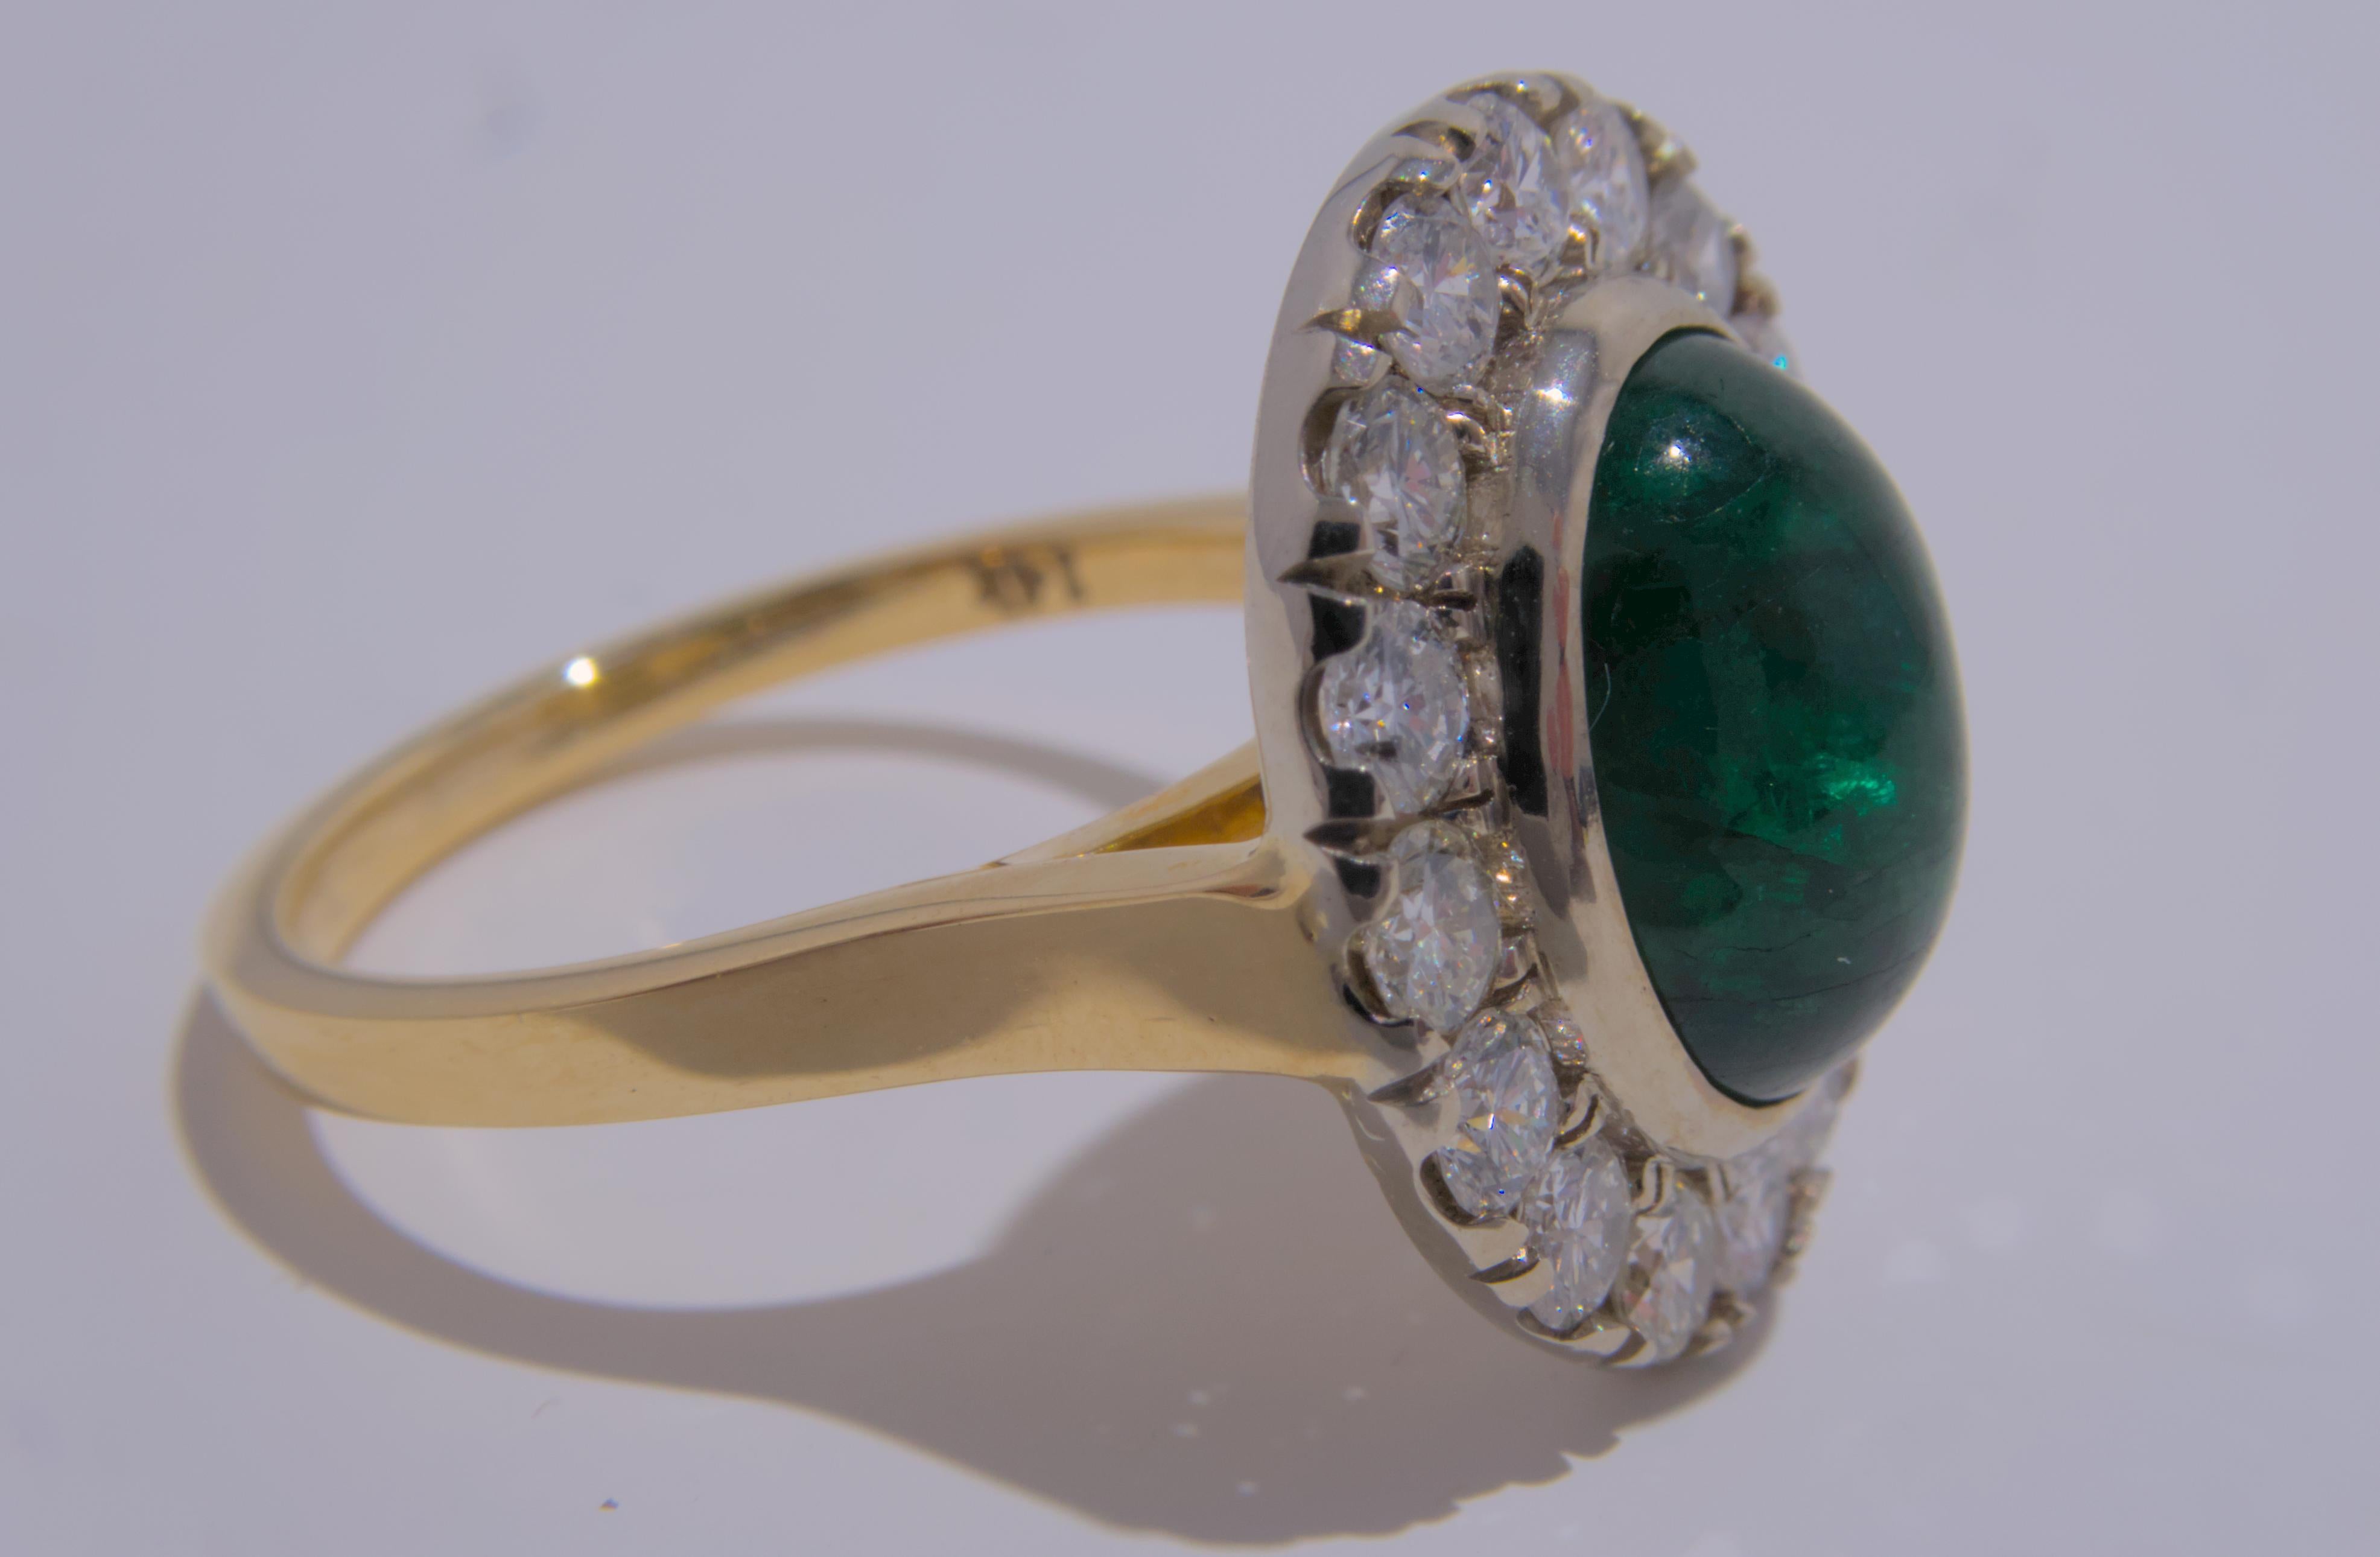 This elegant 14K gold ring showcases a stunning deep green cabochon emerald at its center, surrounded by 16 sparkling round diamonds. The emerald, with an estimated weight of 3.39 carats, is the perfect shade of green and adds a pop of color to the